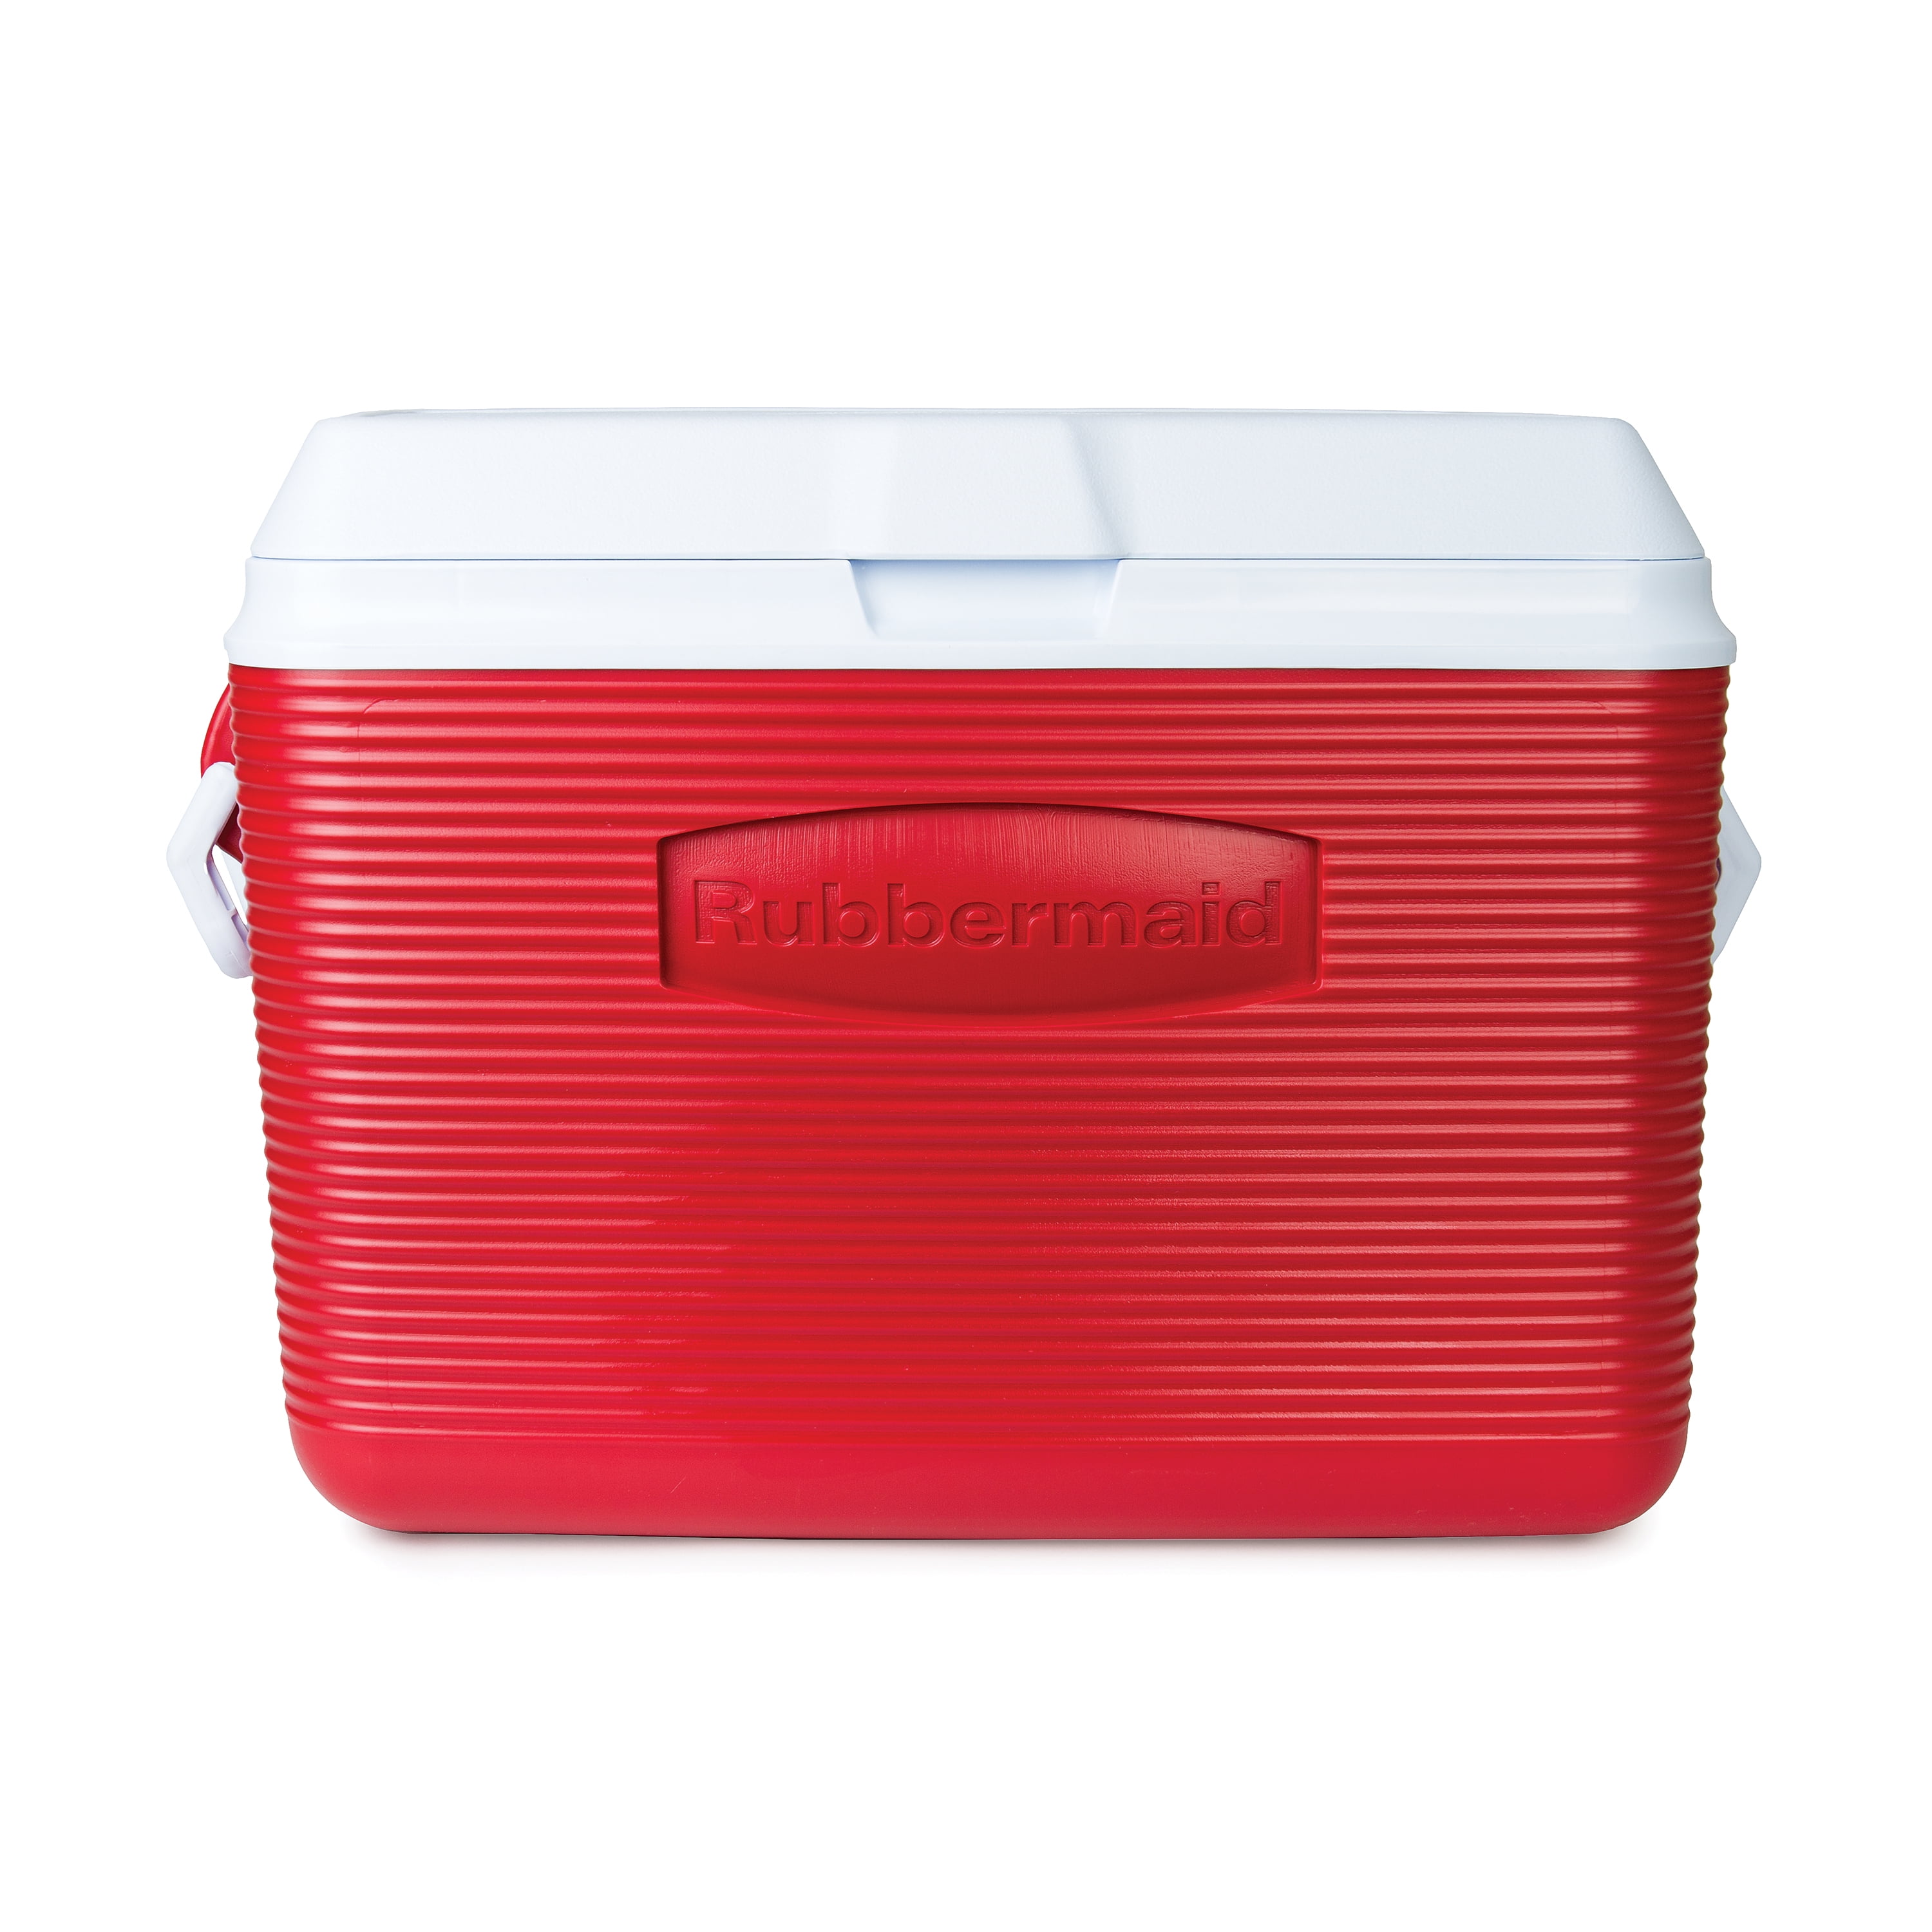 Rubbermaid Lunch Box Insulated Cooler Sidekick Model 2920 Red